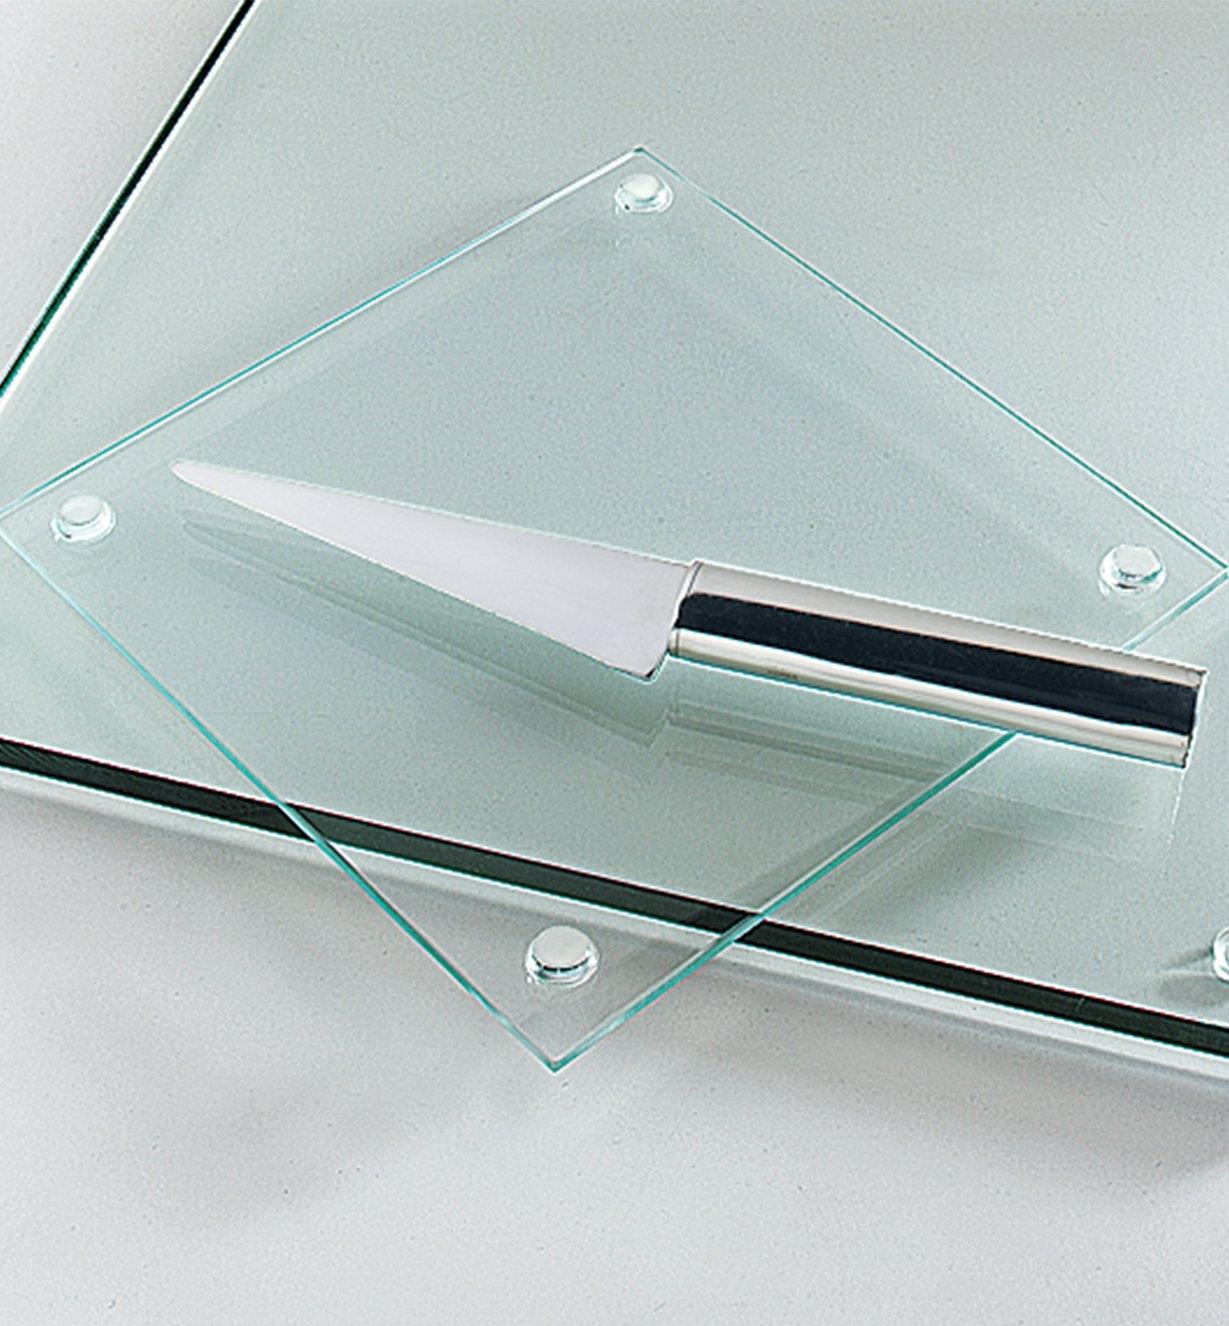 Flat-Bottom Bumpers mounted on the bottom of a glass cutting board sitting on a glass tabletop